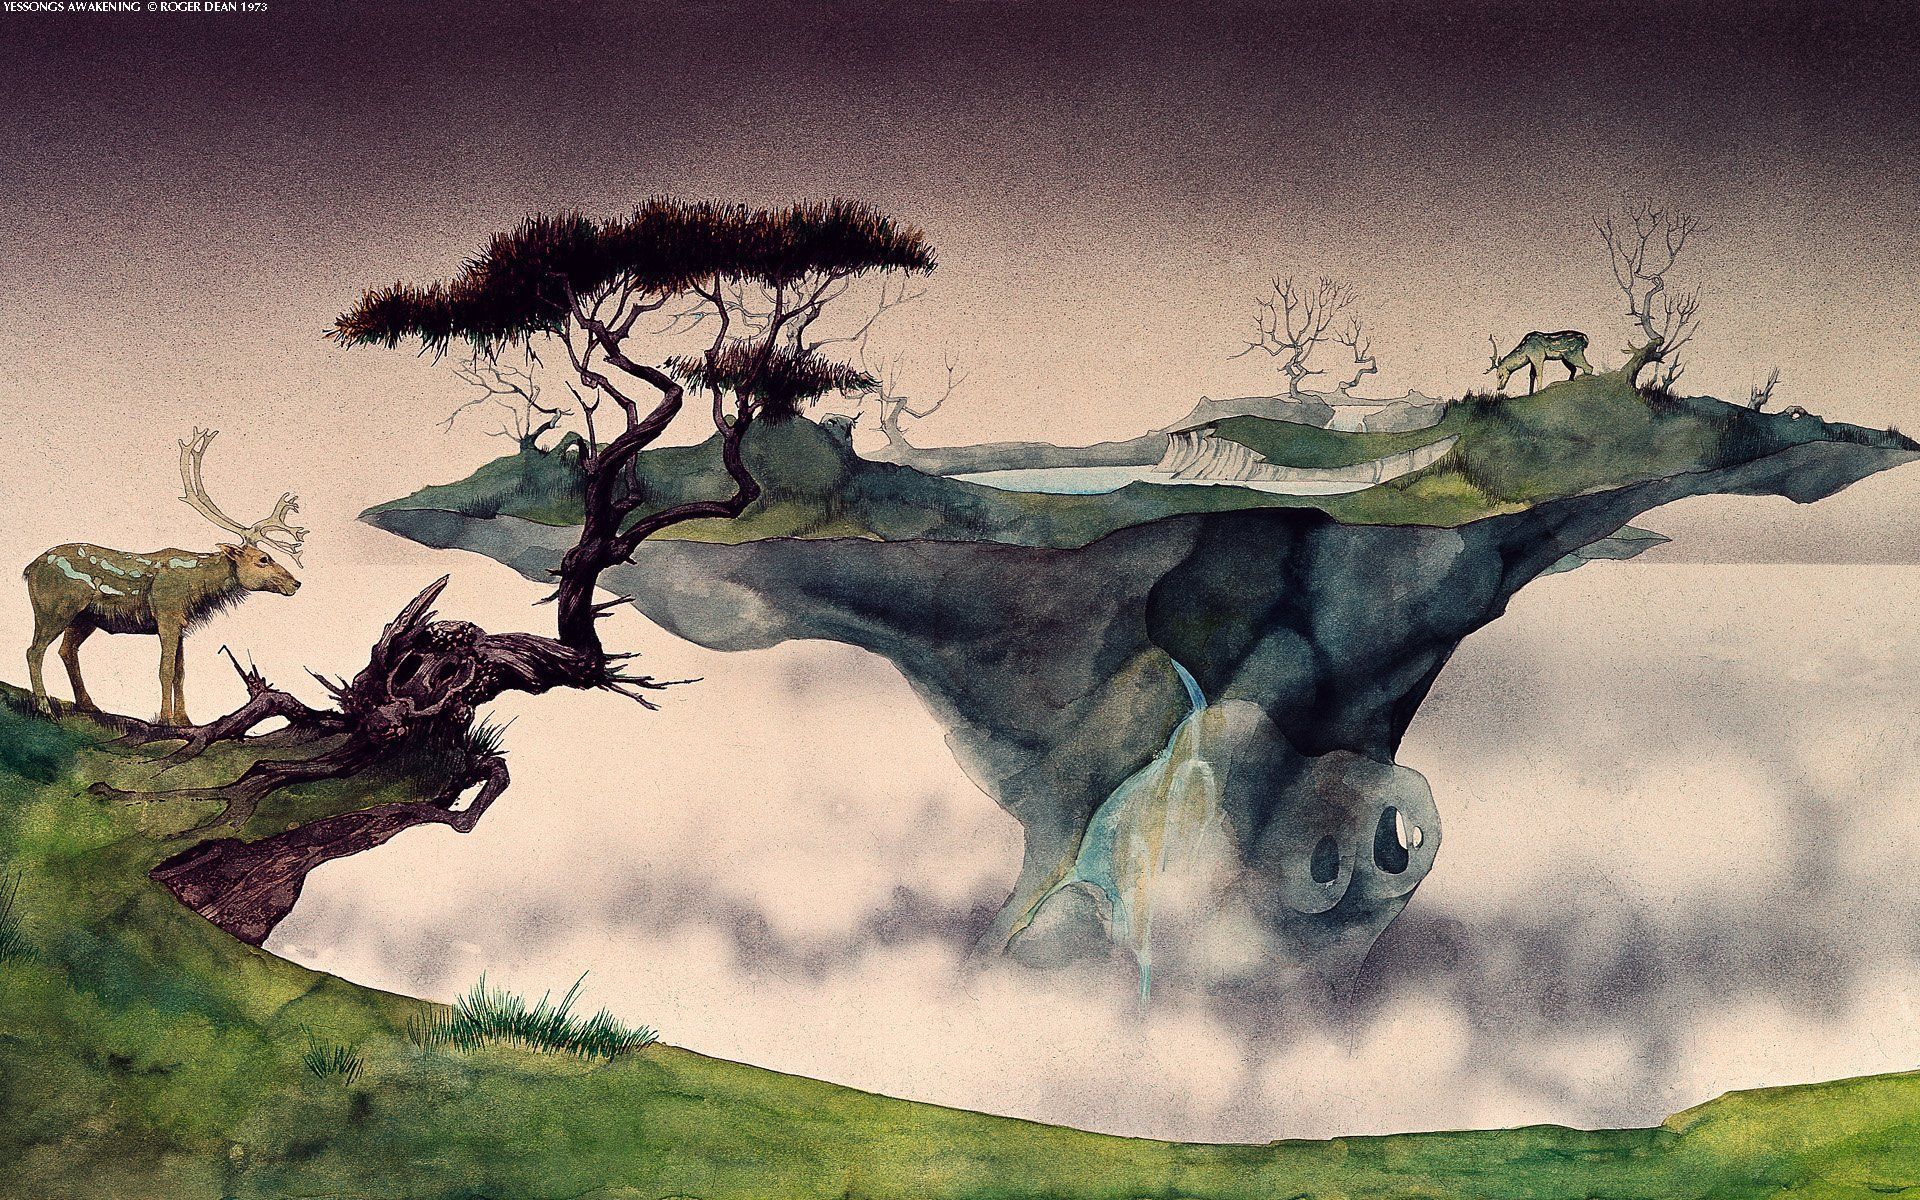 A pack of amazing surreal wallpaper. Roger dean